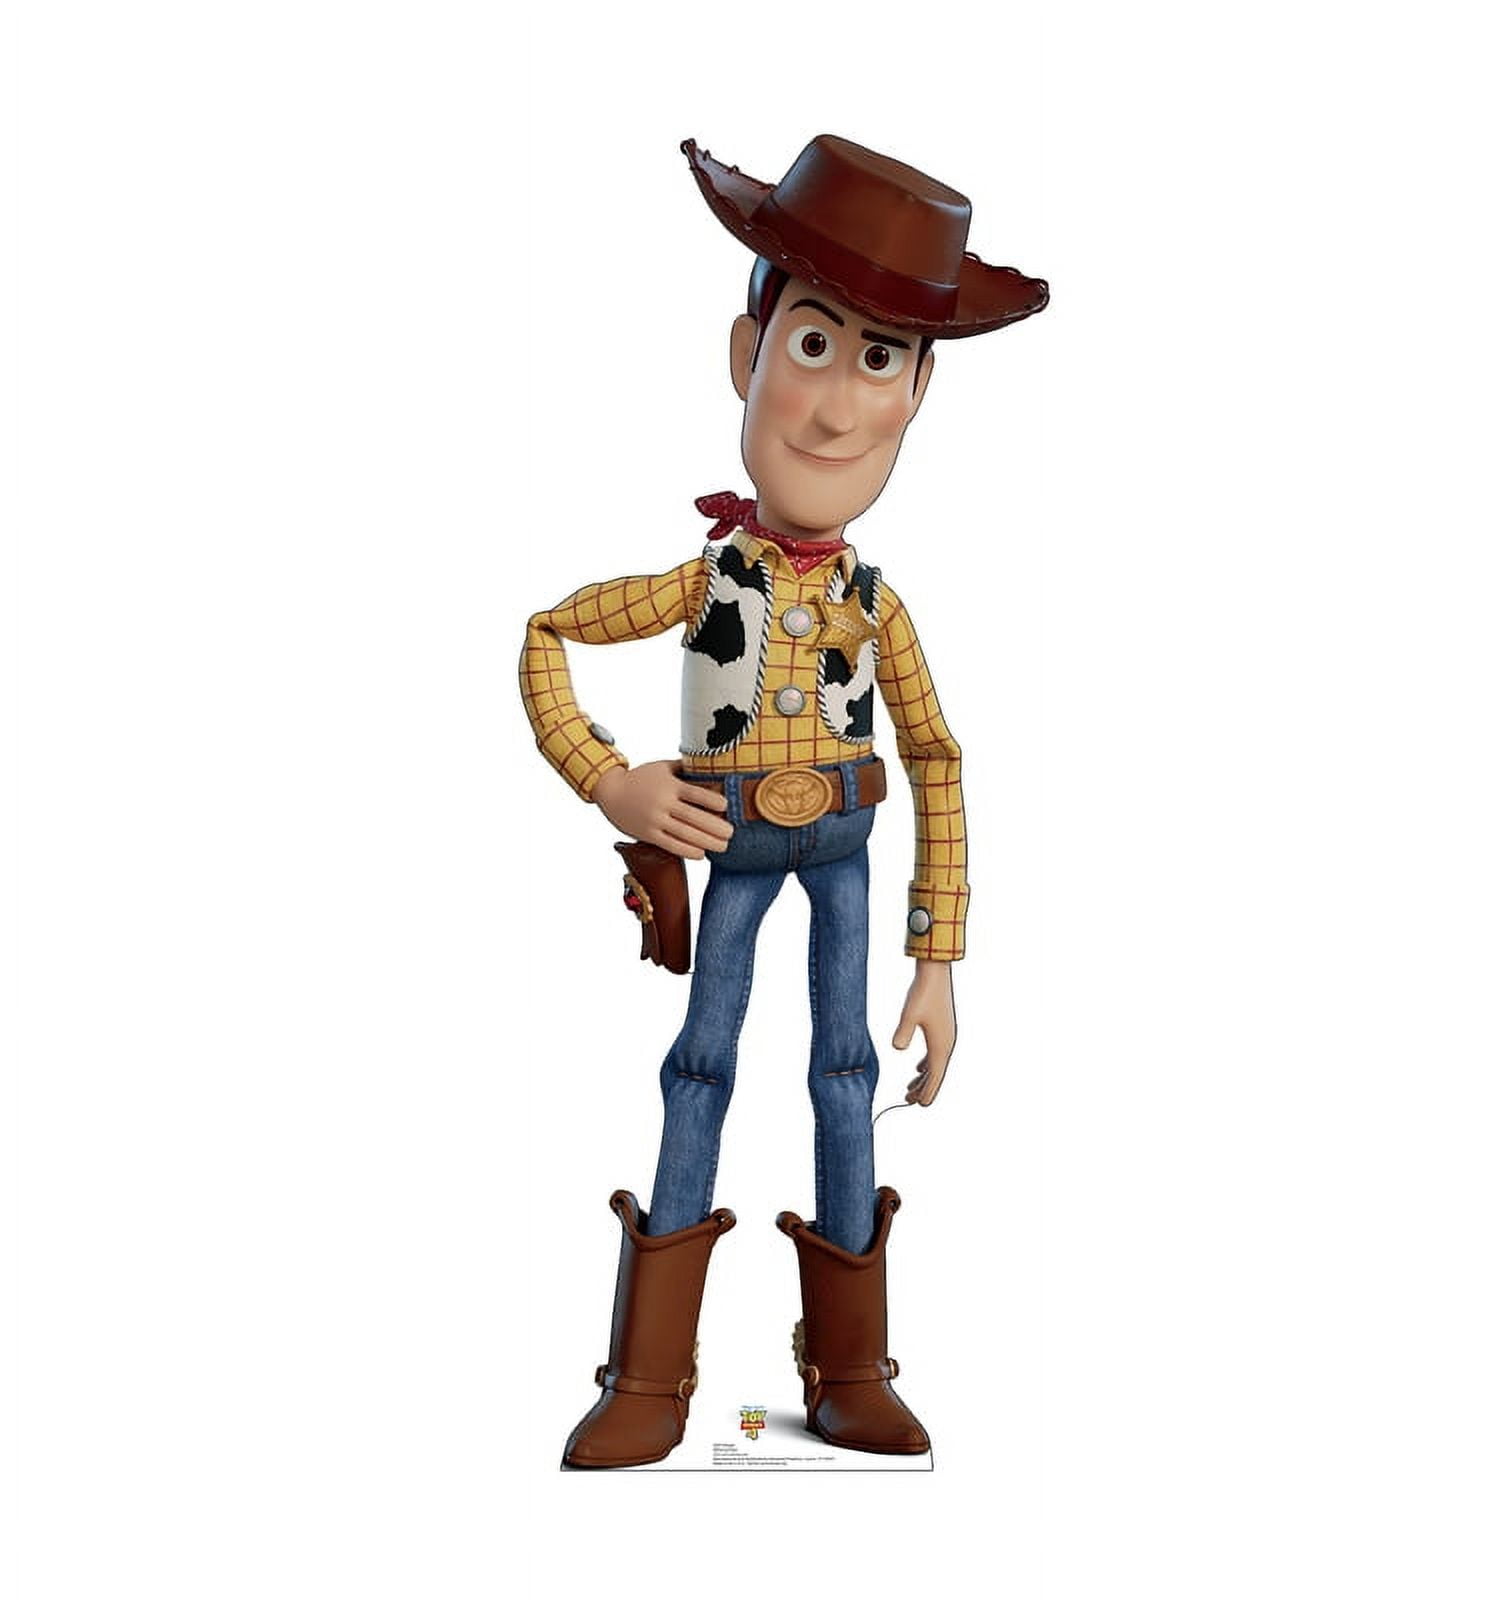 Picture of Advanced Graphics 2923 60 x 23 in. Woody Disney & Pixar Toy Story 4 Cardboard Cutout Standup